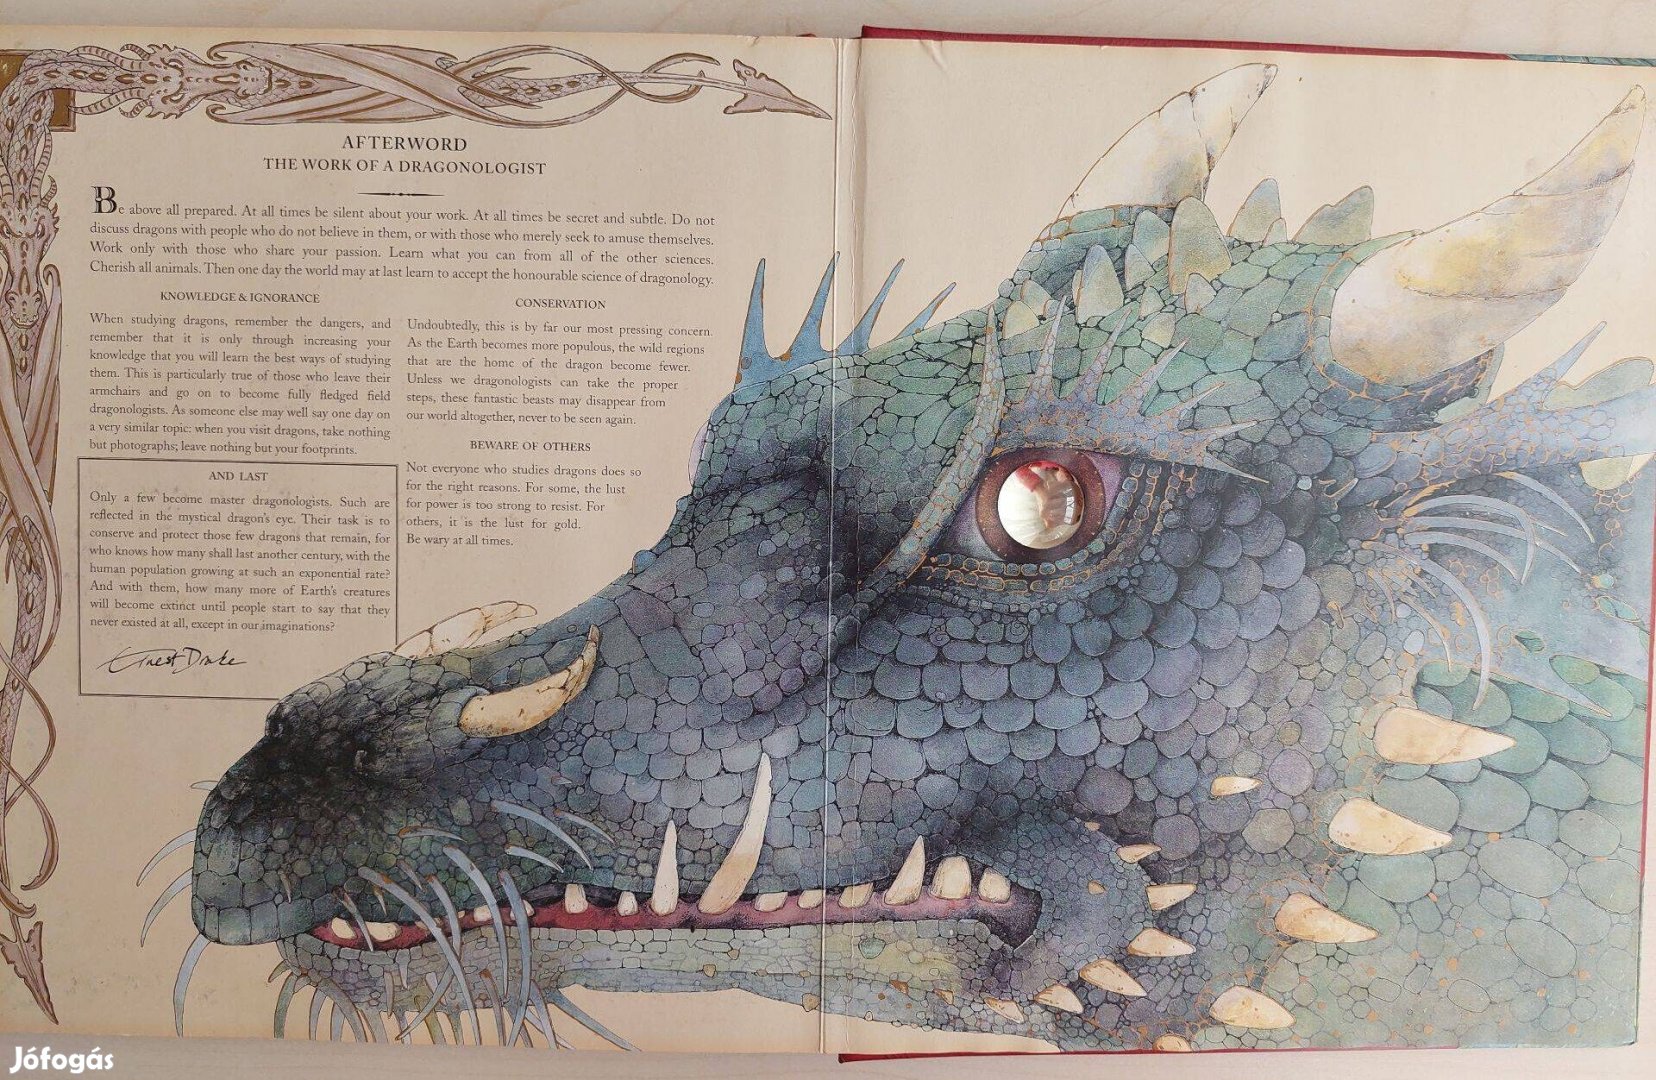 Dragonology (The complete book of dragons)